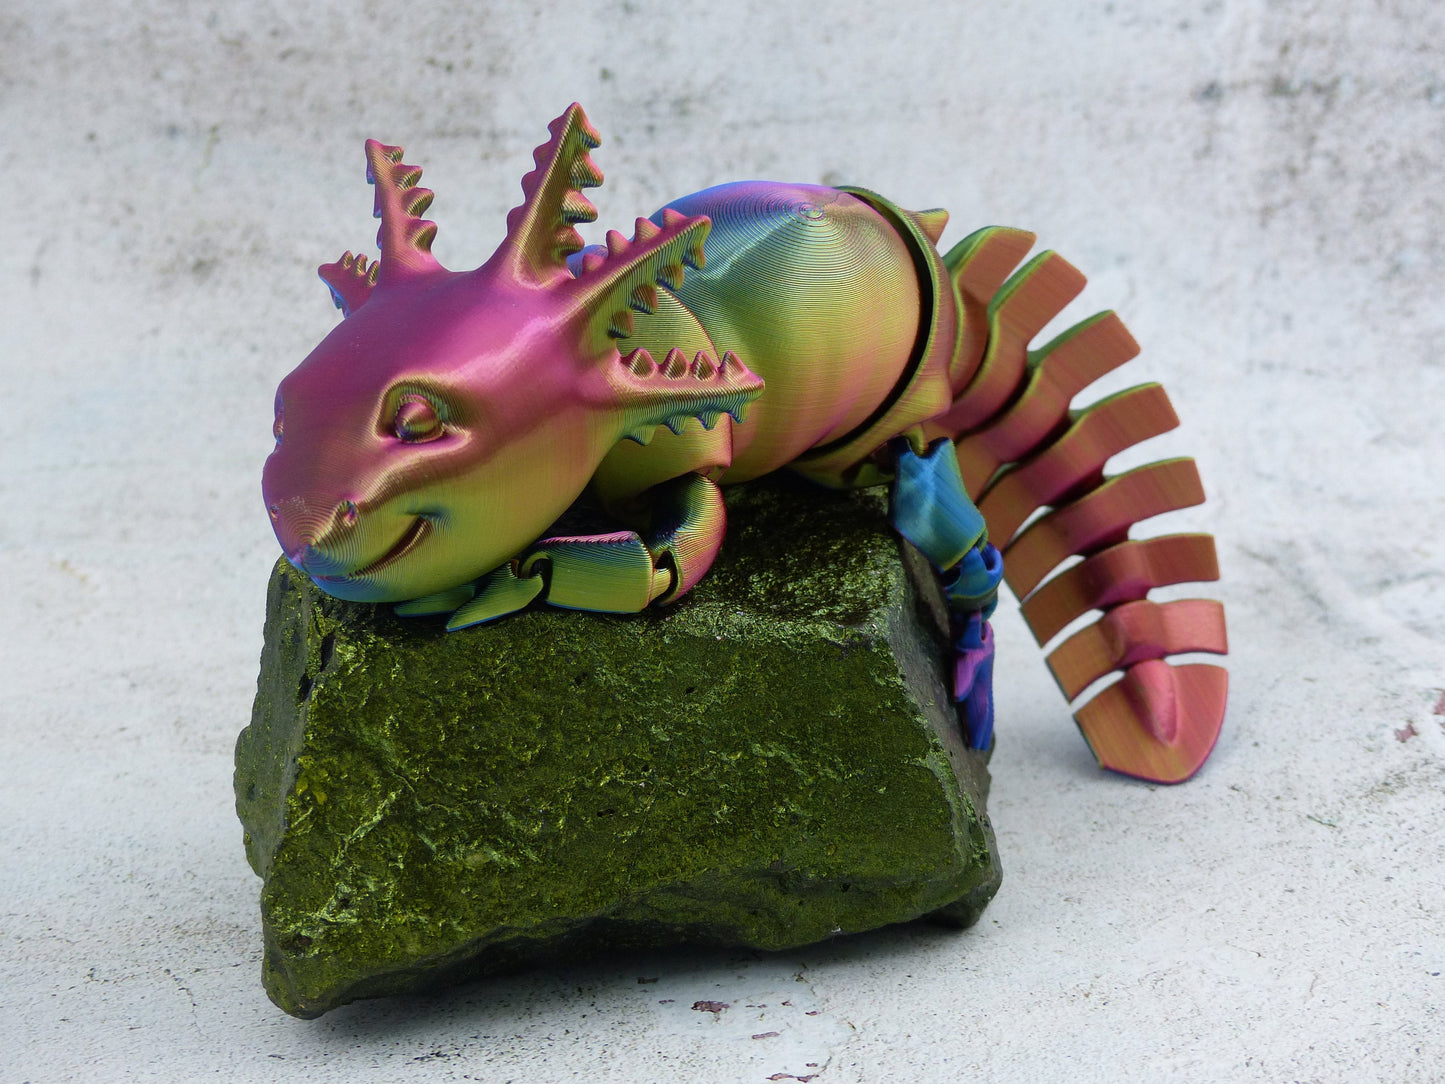 Axolotl Spell Changer: 3D printed, colour-changing mythical creature